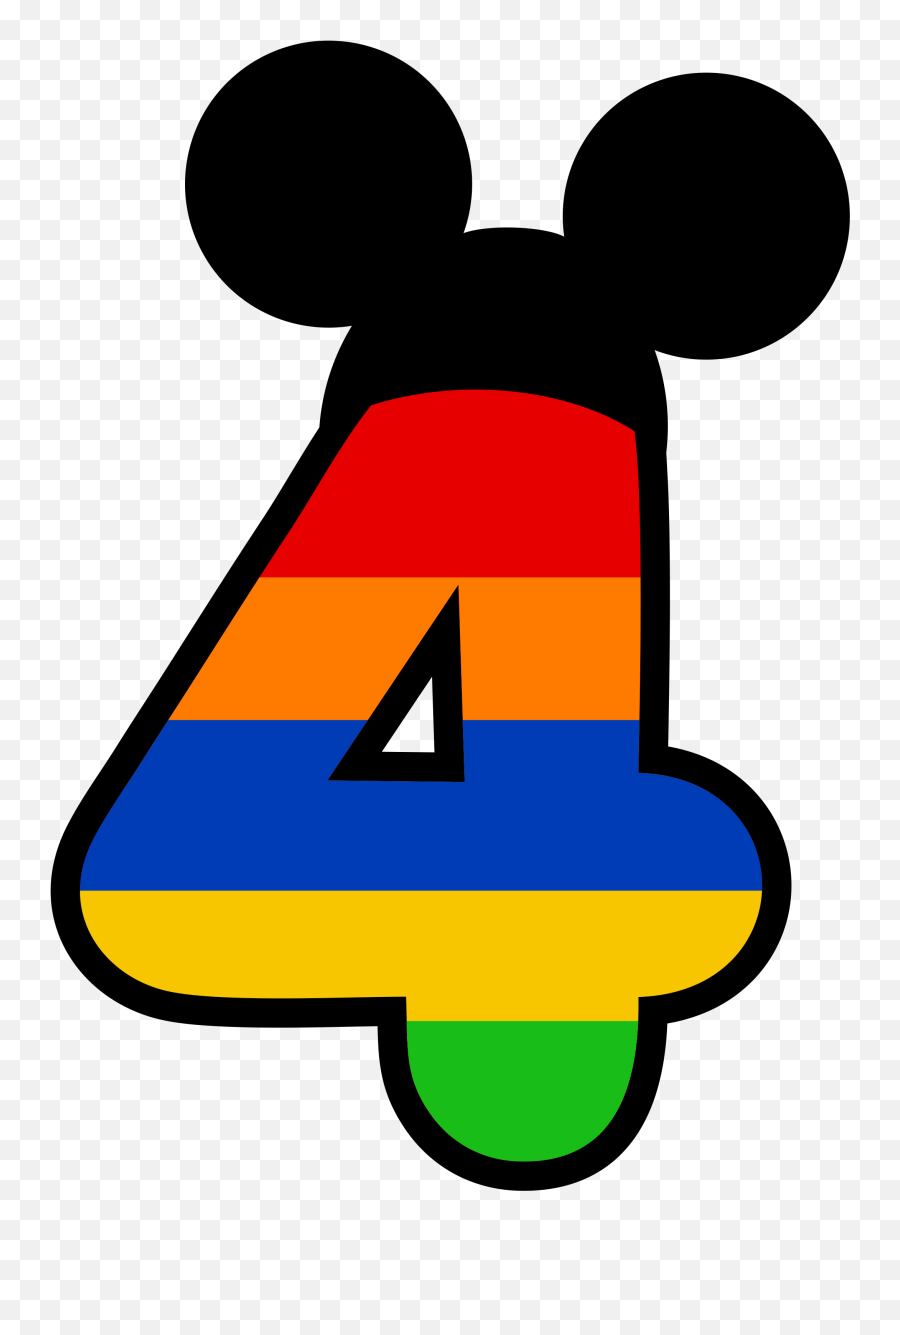 Download 59 Best Mickey Mouse Images - Numeros Mickey Mouse Mickey Mouse Number 4 Clip Art Emoji,Mickey Mouse Png